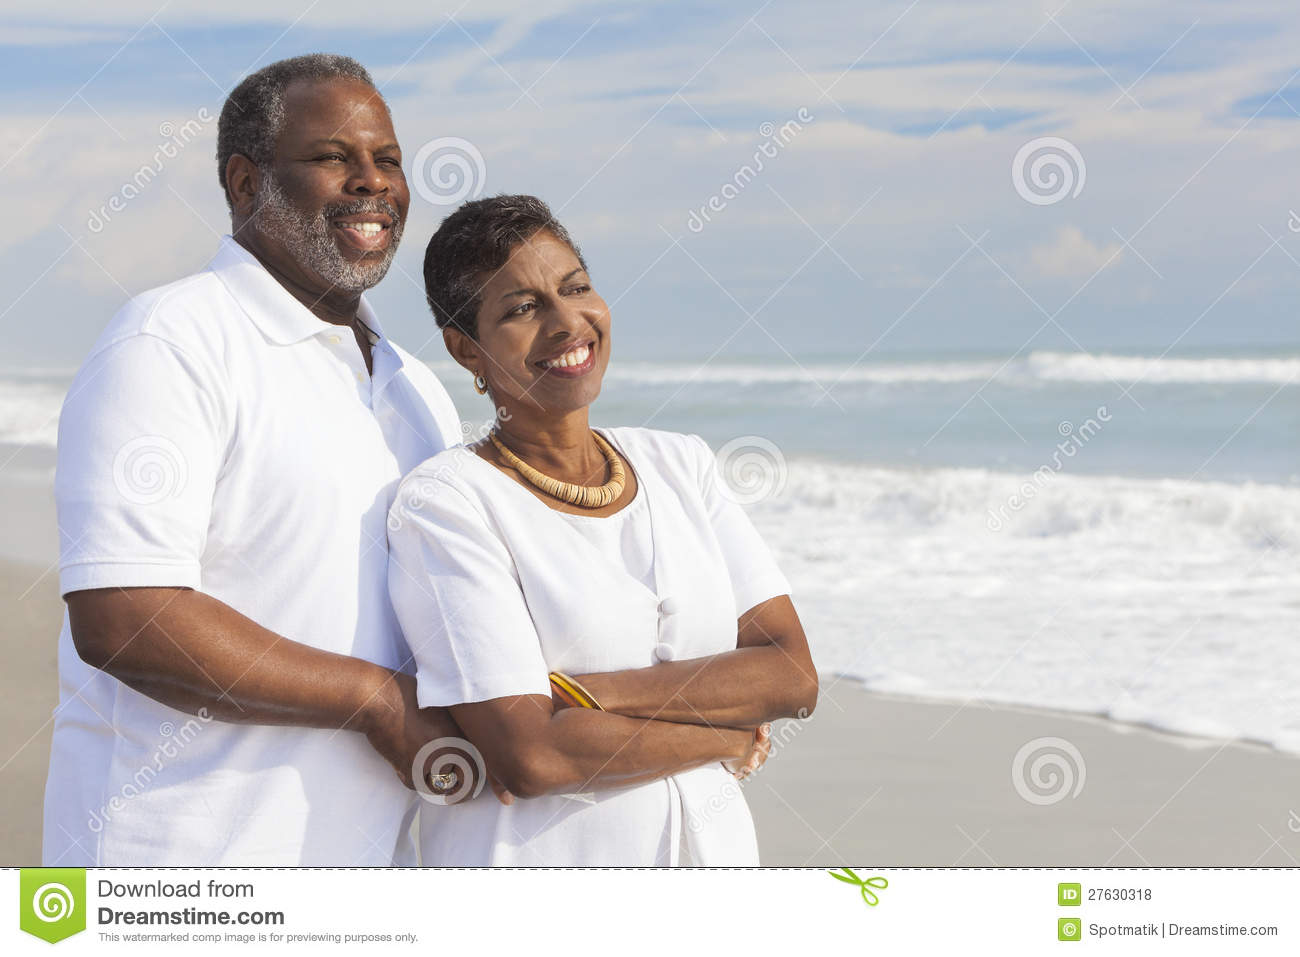 Happy African American Family Over Clouds Stock Image Pictures